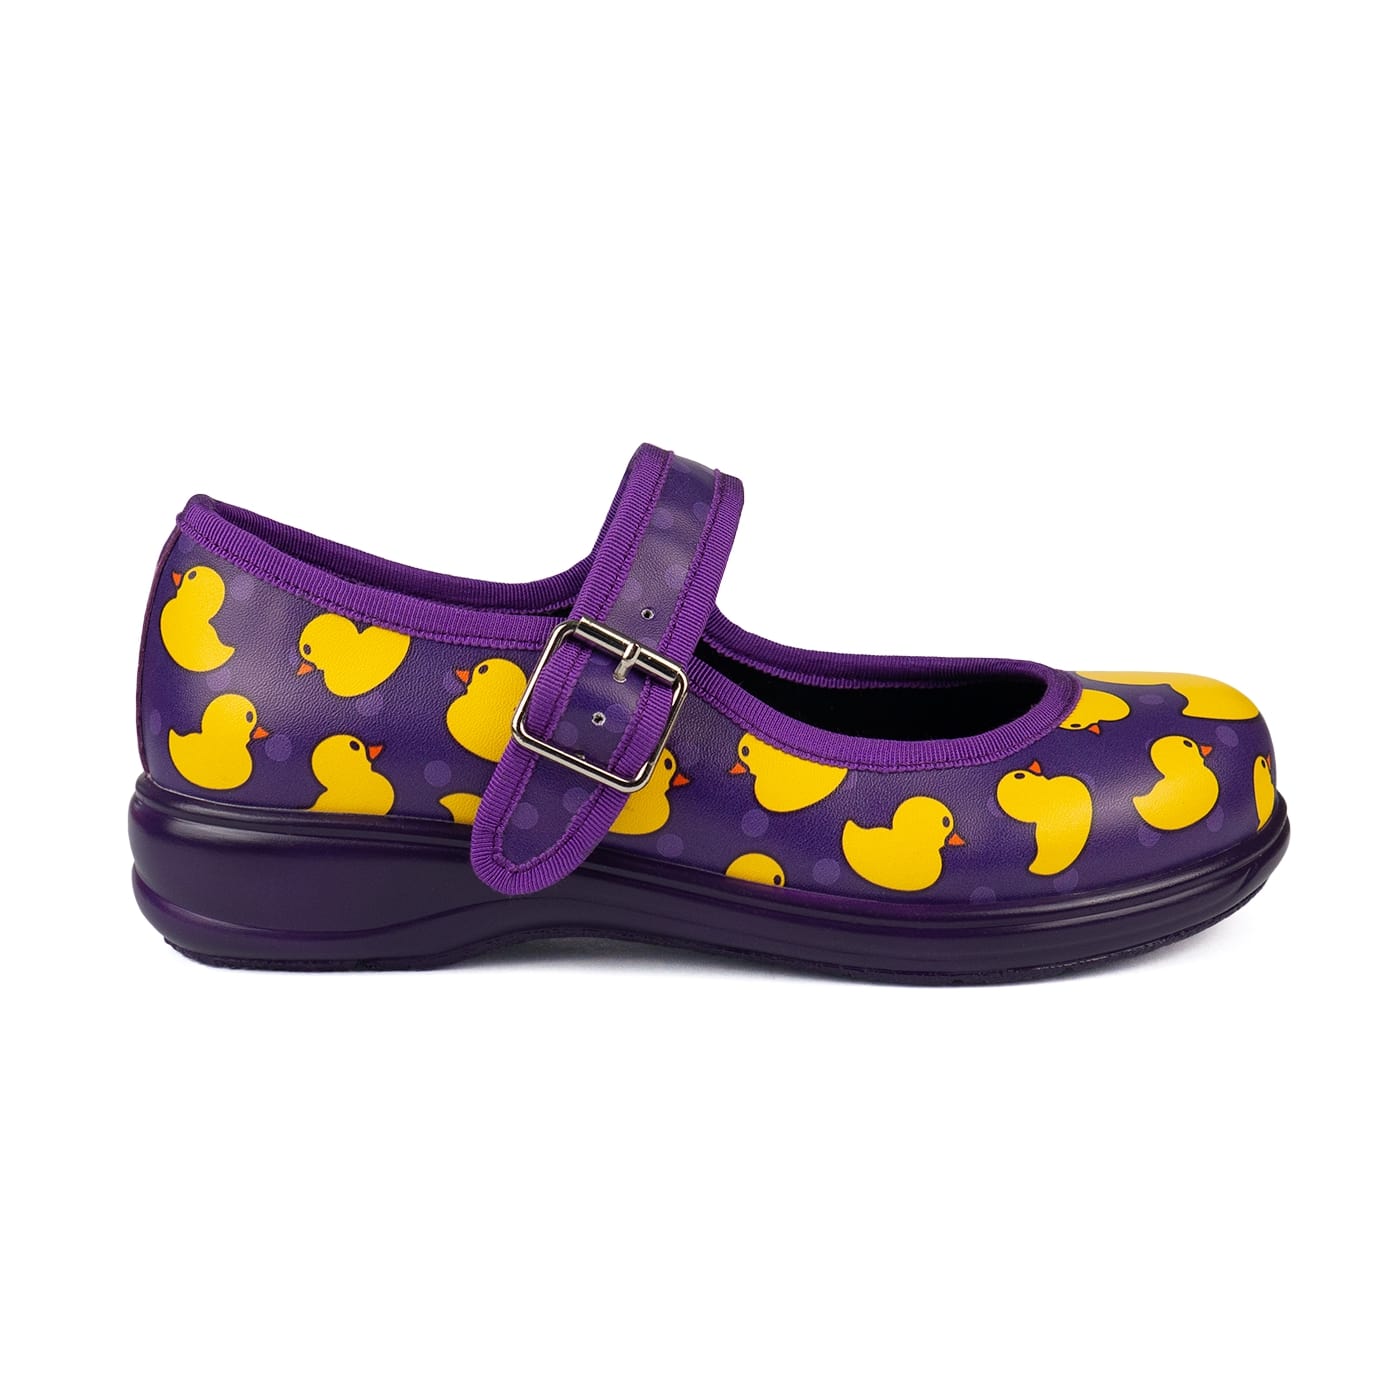 Yellow Ducky Mary Janes by RainbowsAndFairies.com.au (Rubber Duck - Sesame Street - Mismatched Shoes - Cute & Comfy - Buckle Up Shoes) - SKU: FW_MARYJ_DUCKY_YEL - Pic-04